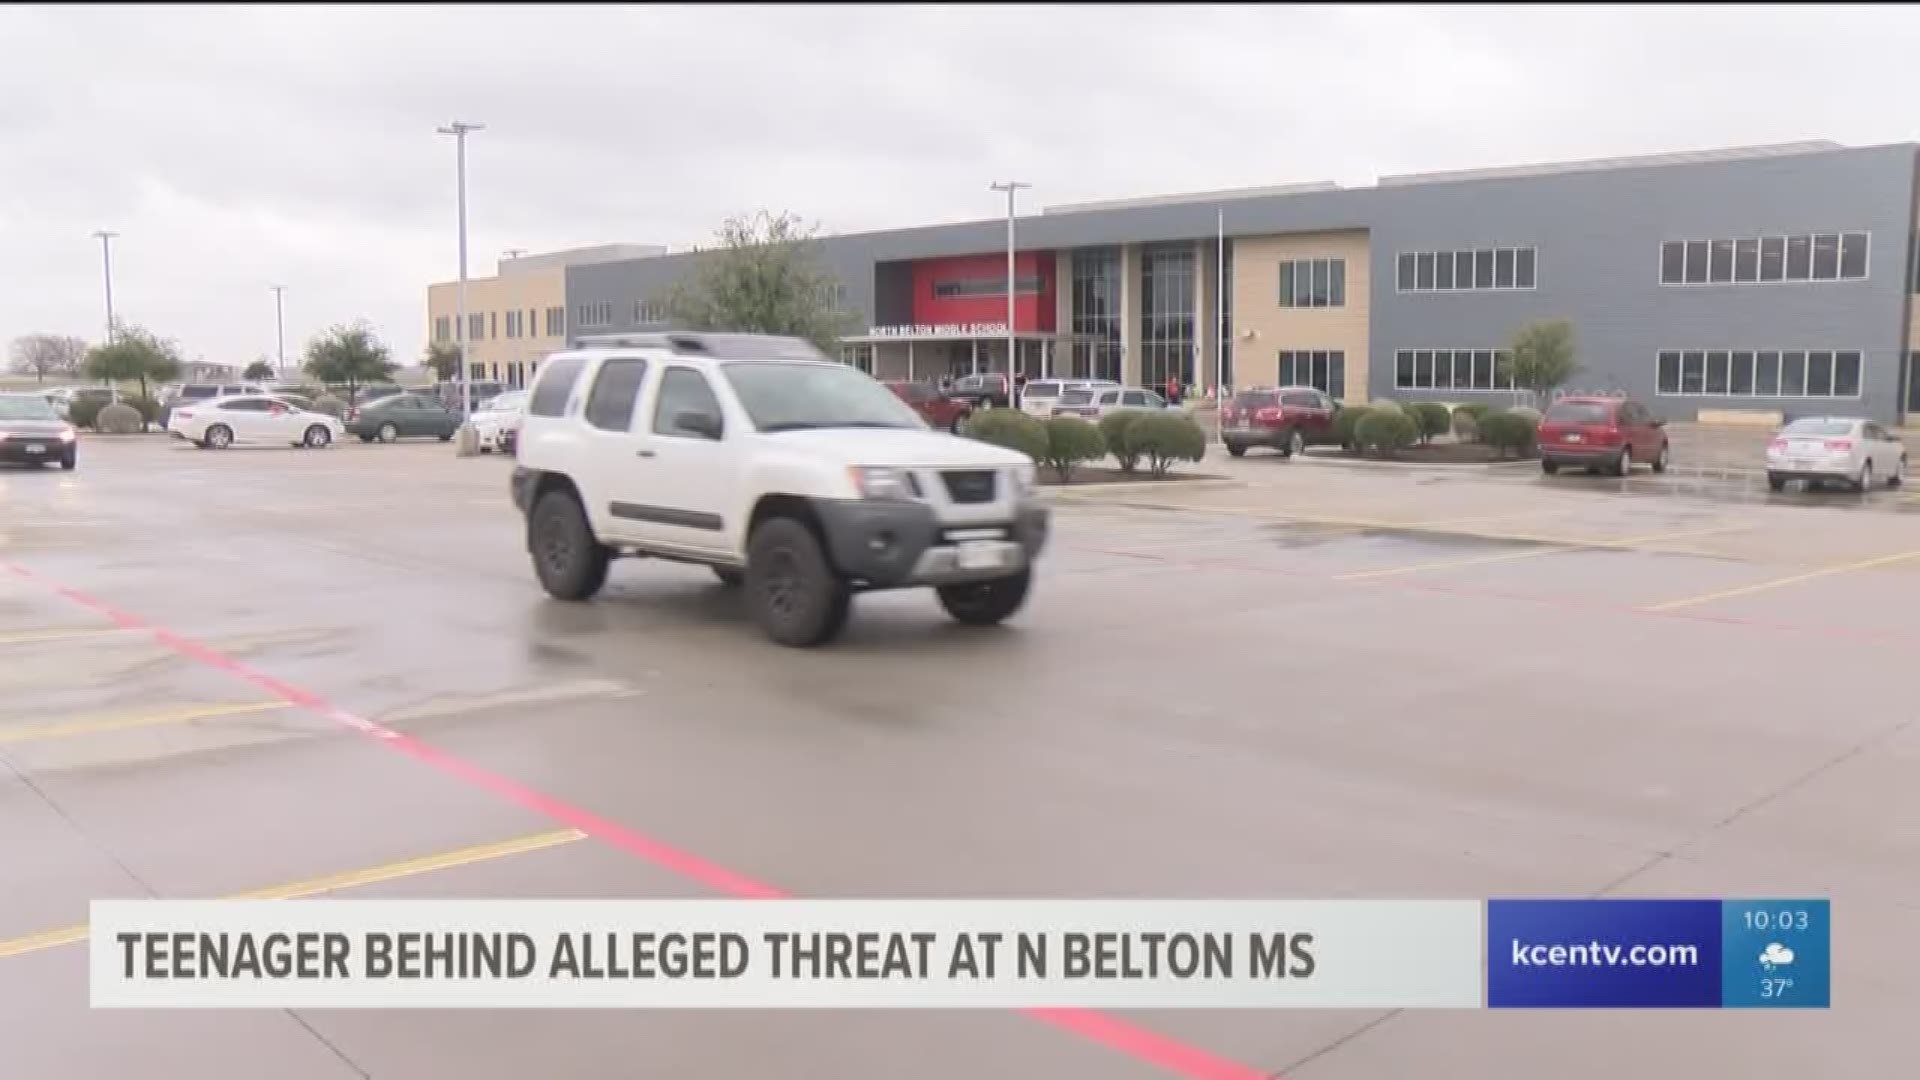 Temple Police said a 14-year-old student was behind Tuesday's alleged threat at North Belton Middle School. 